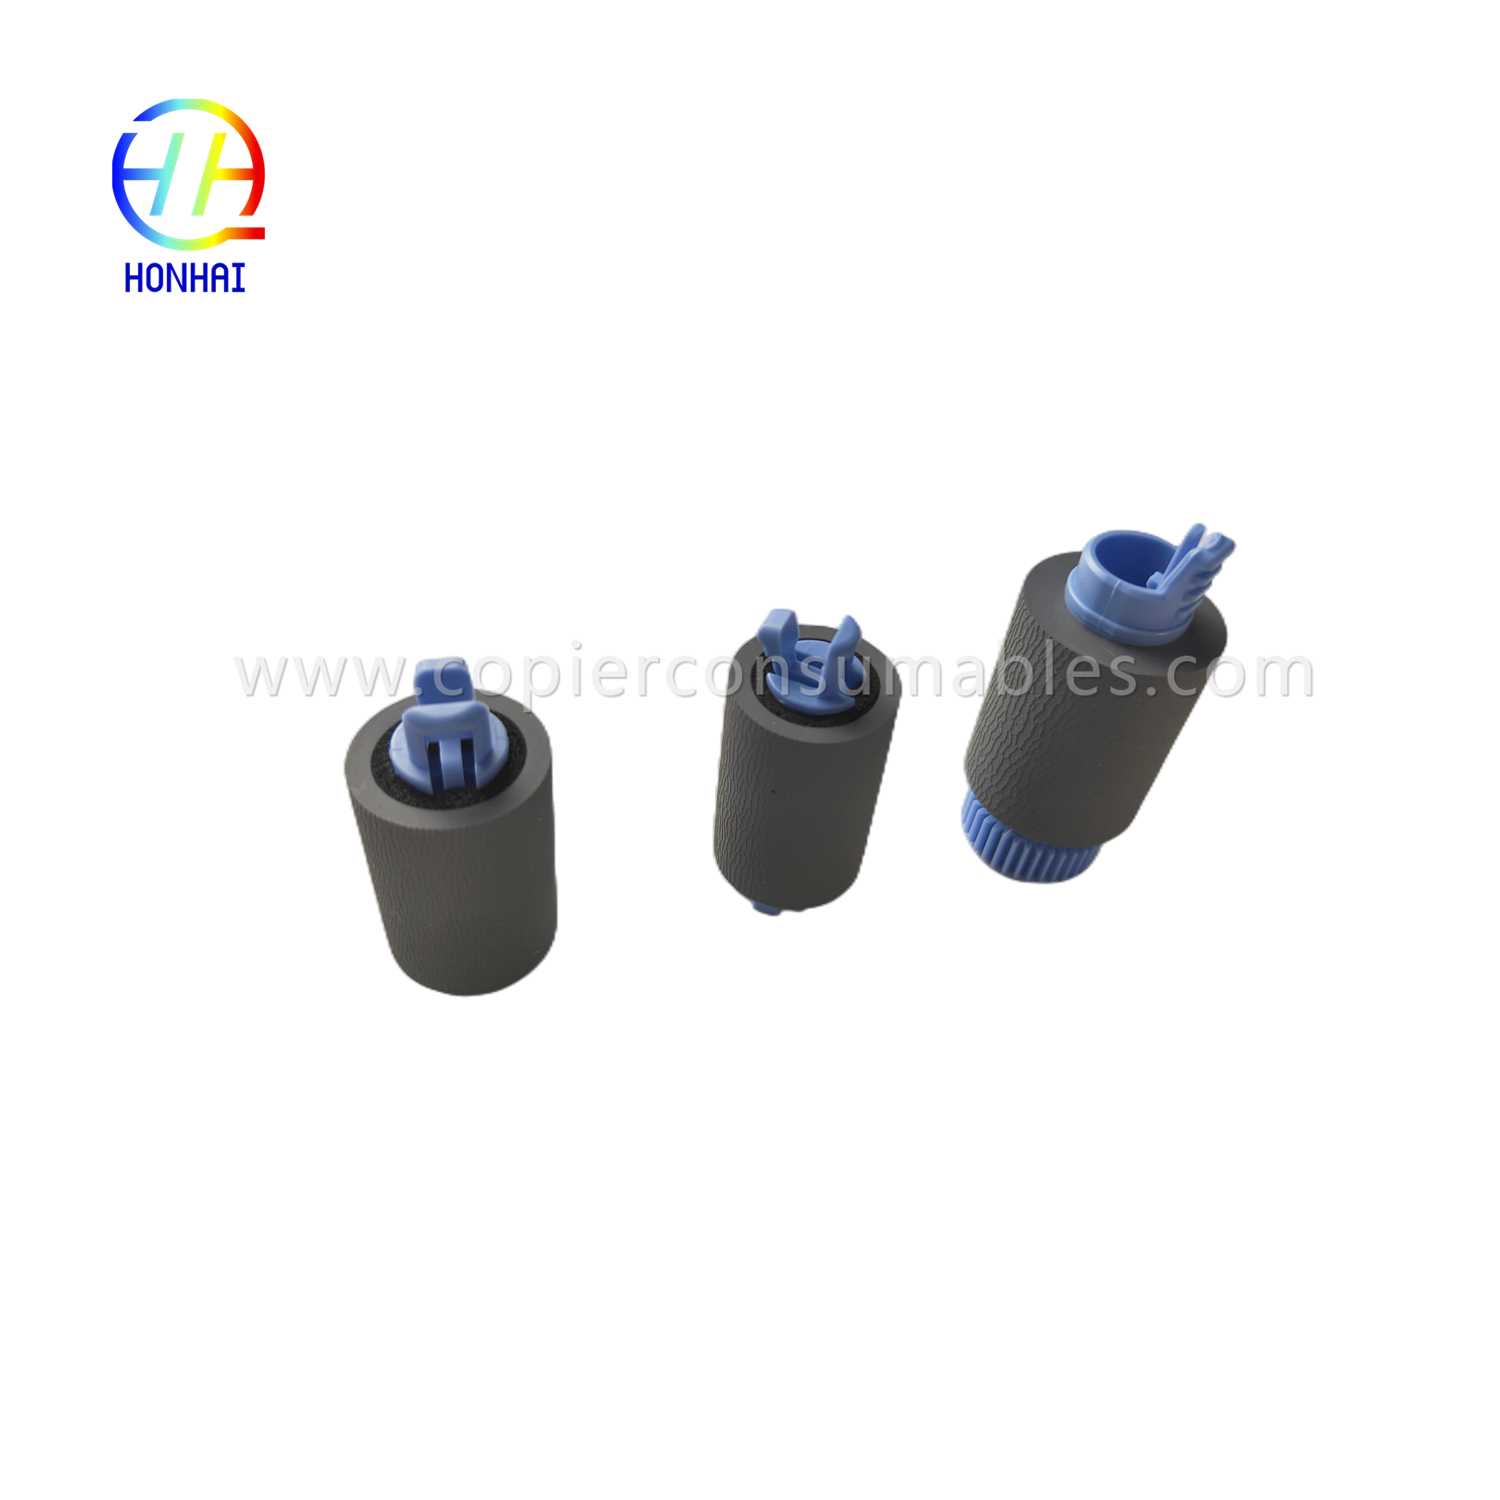 https://www.copierconsumables.com/tray-2-5-pickup-feed-separation-roller-set-for-hp-a7w93-67082-mfp-785f-780dn-e77650z-e77660z-e7767650z-e77650dn-70dn-70 p77750z-p77760z-p75050dn-p75050dw-product/